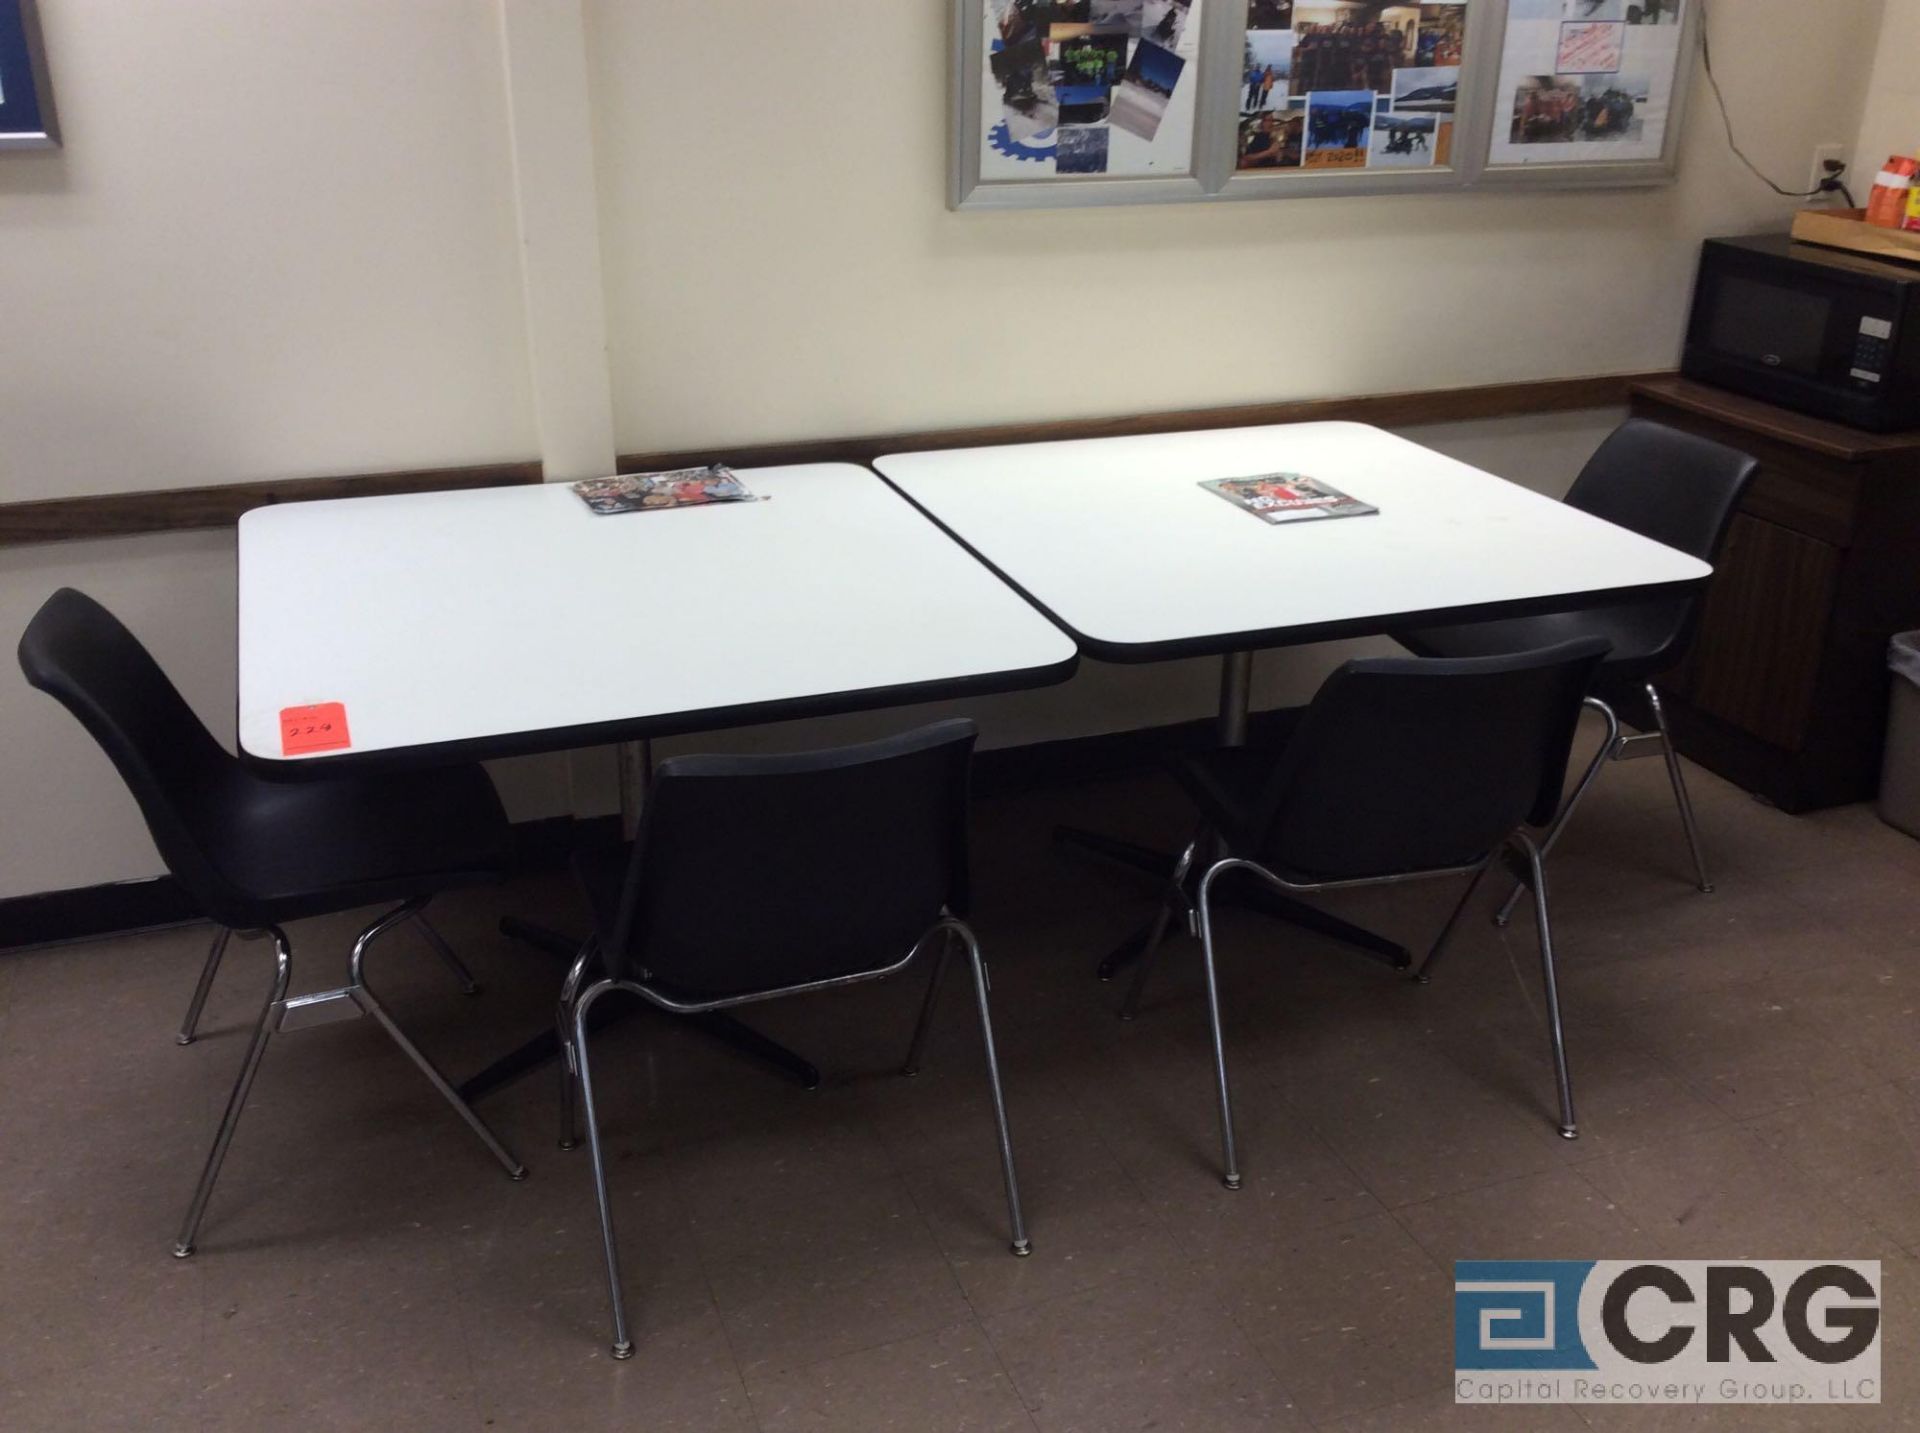 Lot of breakroom furniture including (4) 42 inch X 42 inch pedestal tables and (18) plastic stack